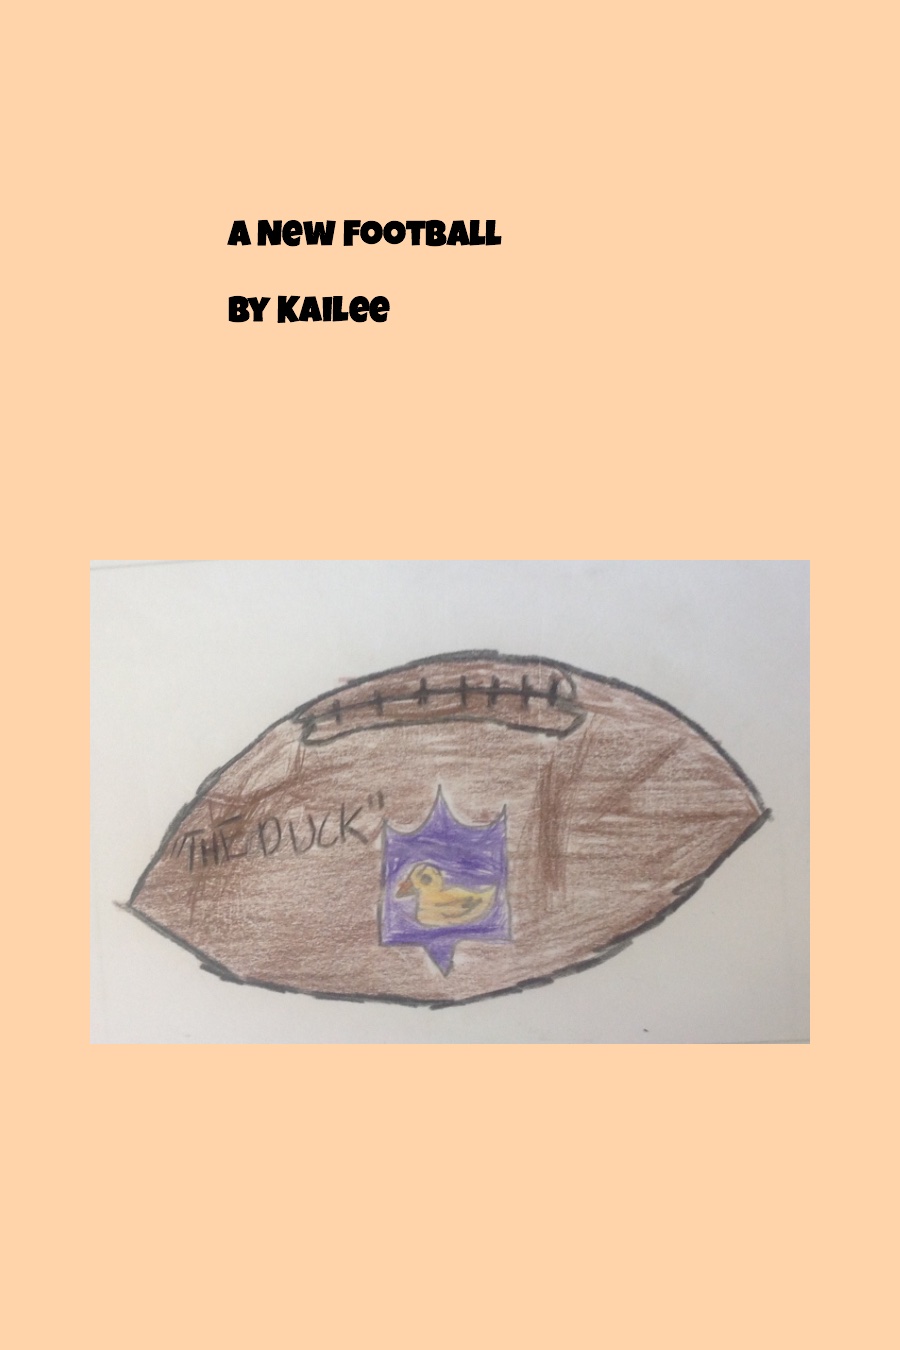 A New Football by Kailee Q